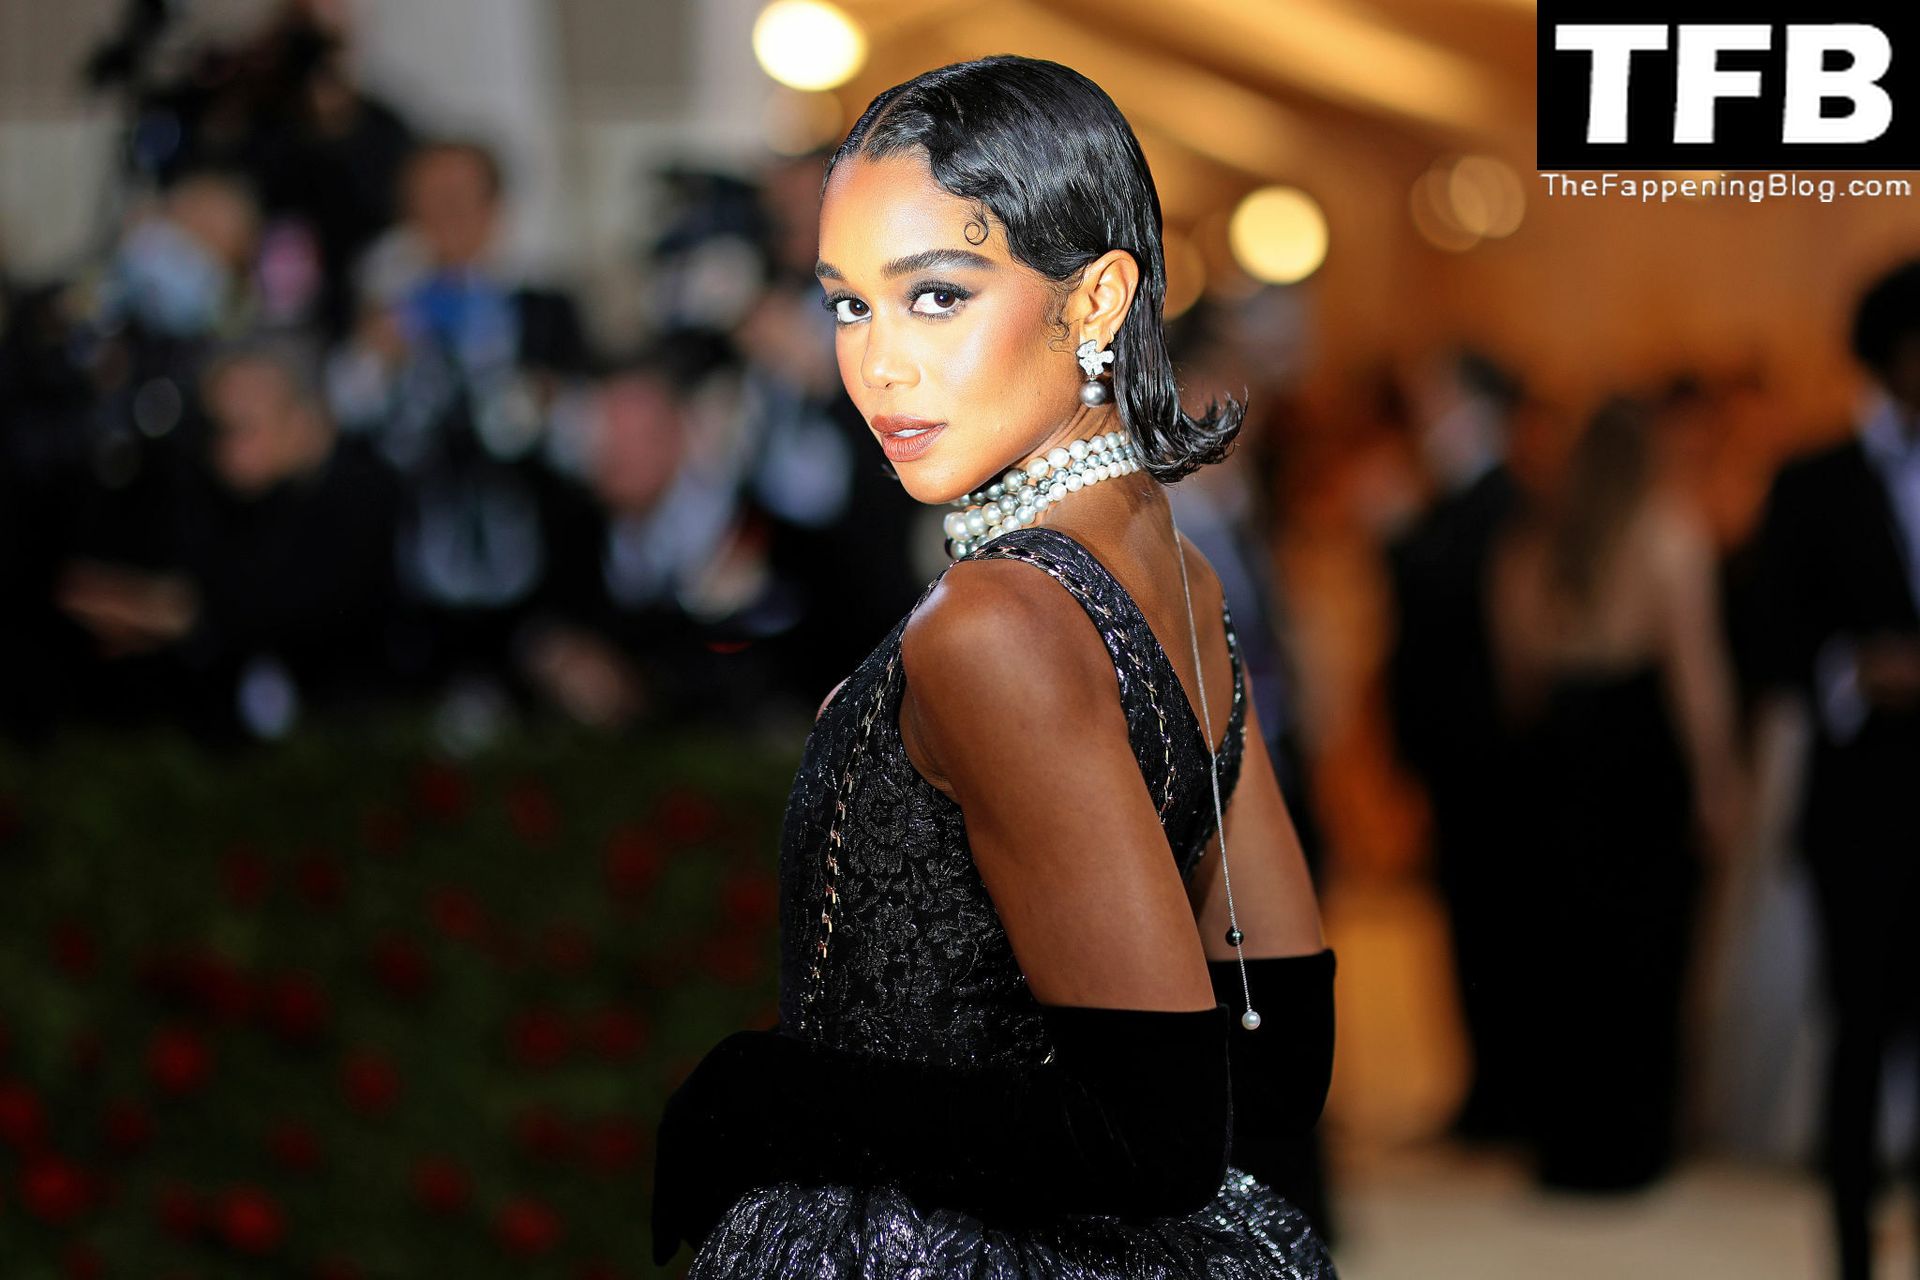 Laura-Harrier-Sexy-The-Fappening-Blog-11.jpg